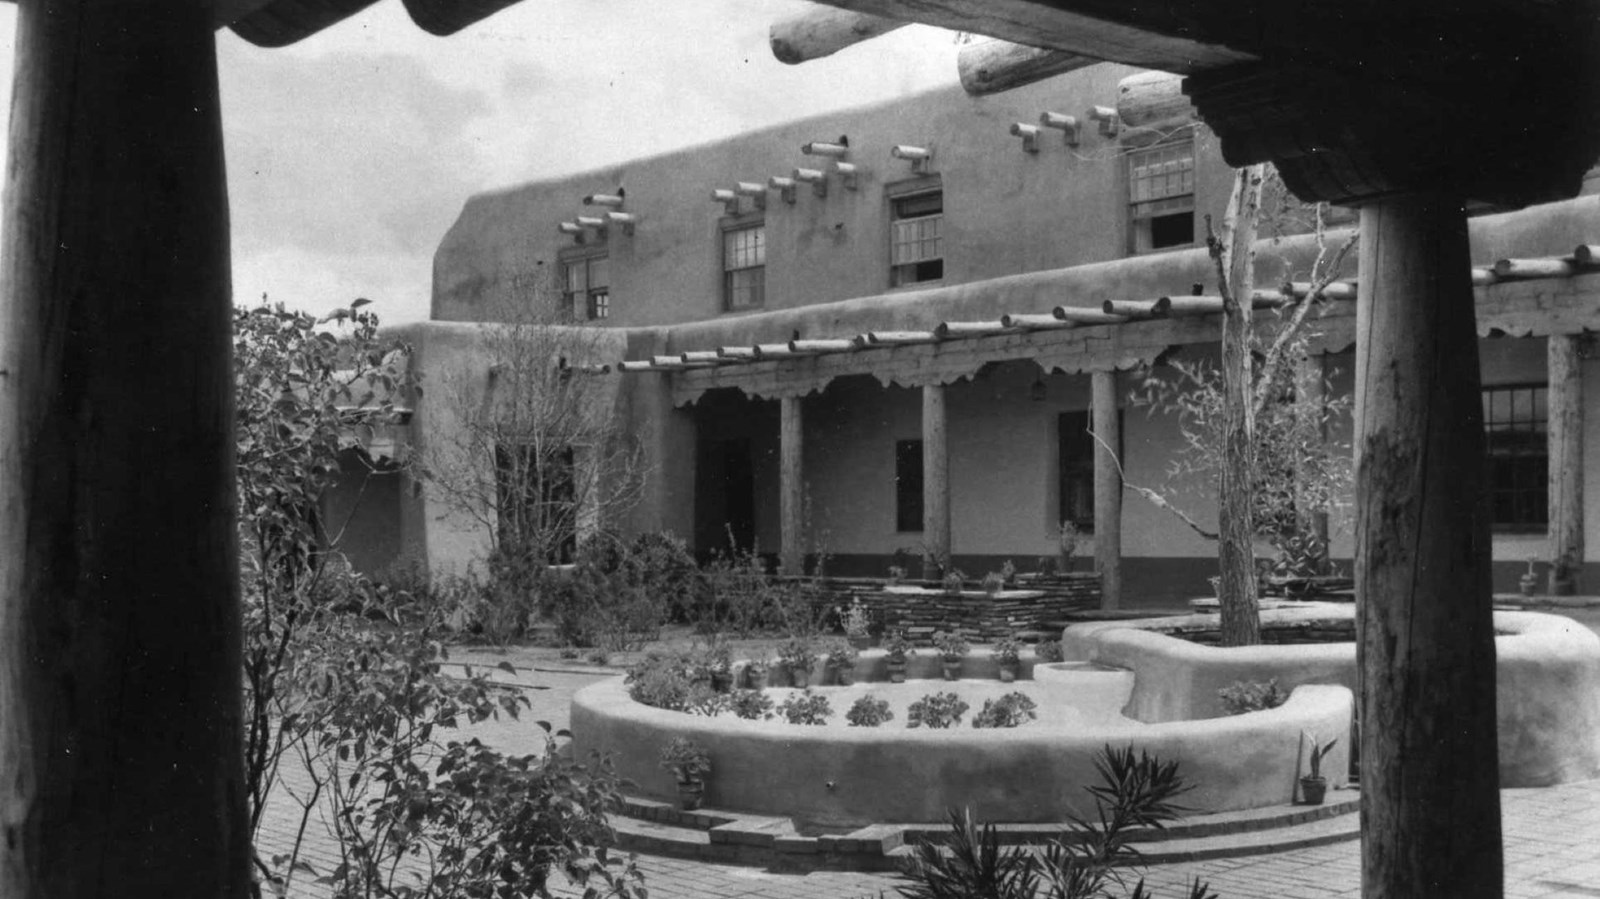 A historic black and white photo of a two story, adobe building.